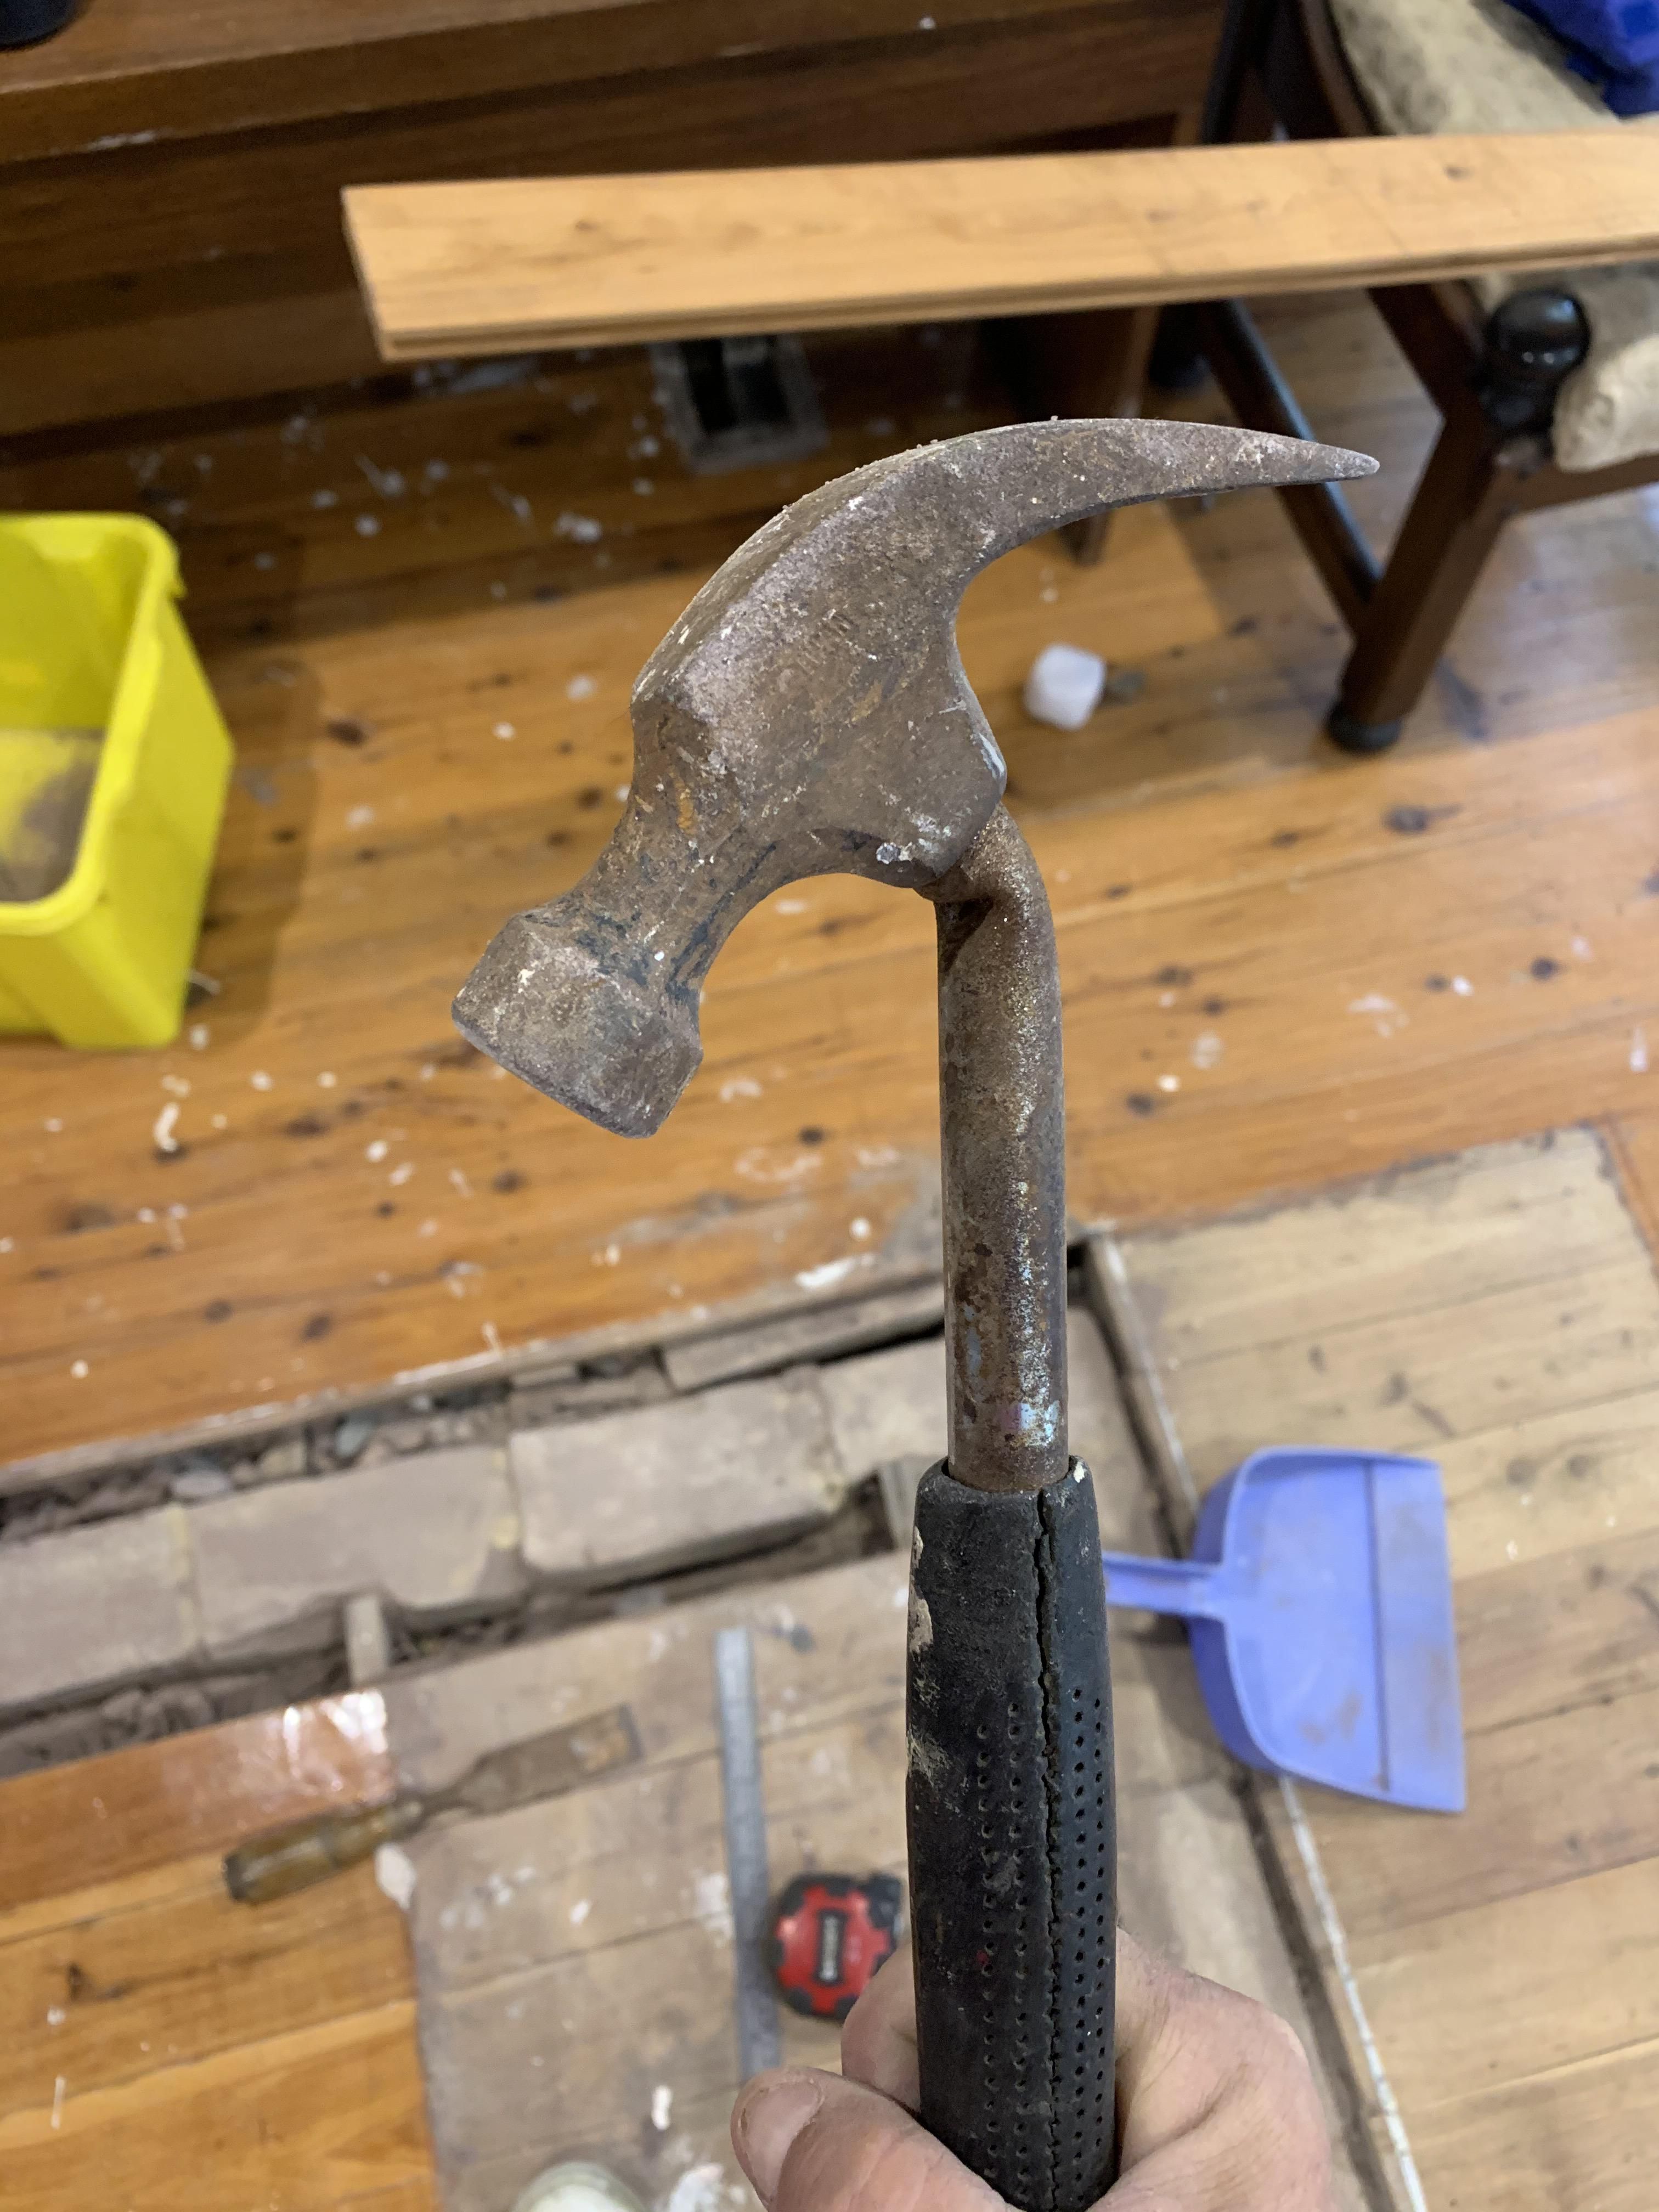 I broke a hammer trying to pry a nail out of the floorboards and it looks really disappointed in itself